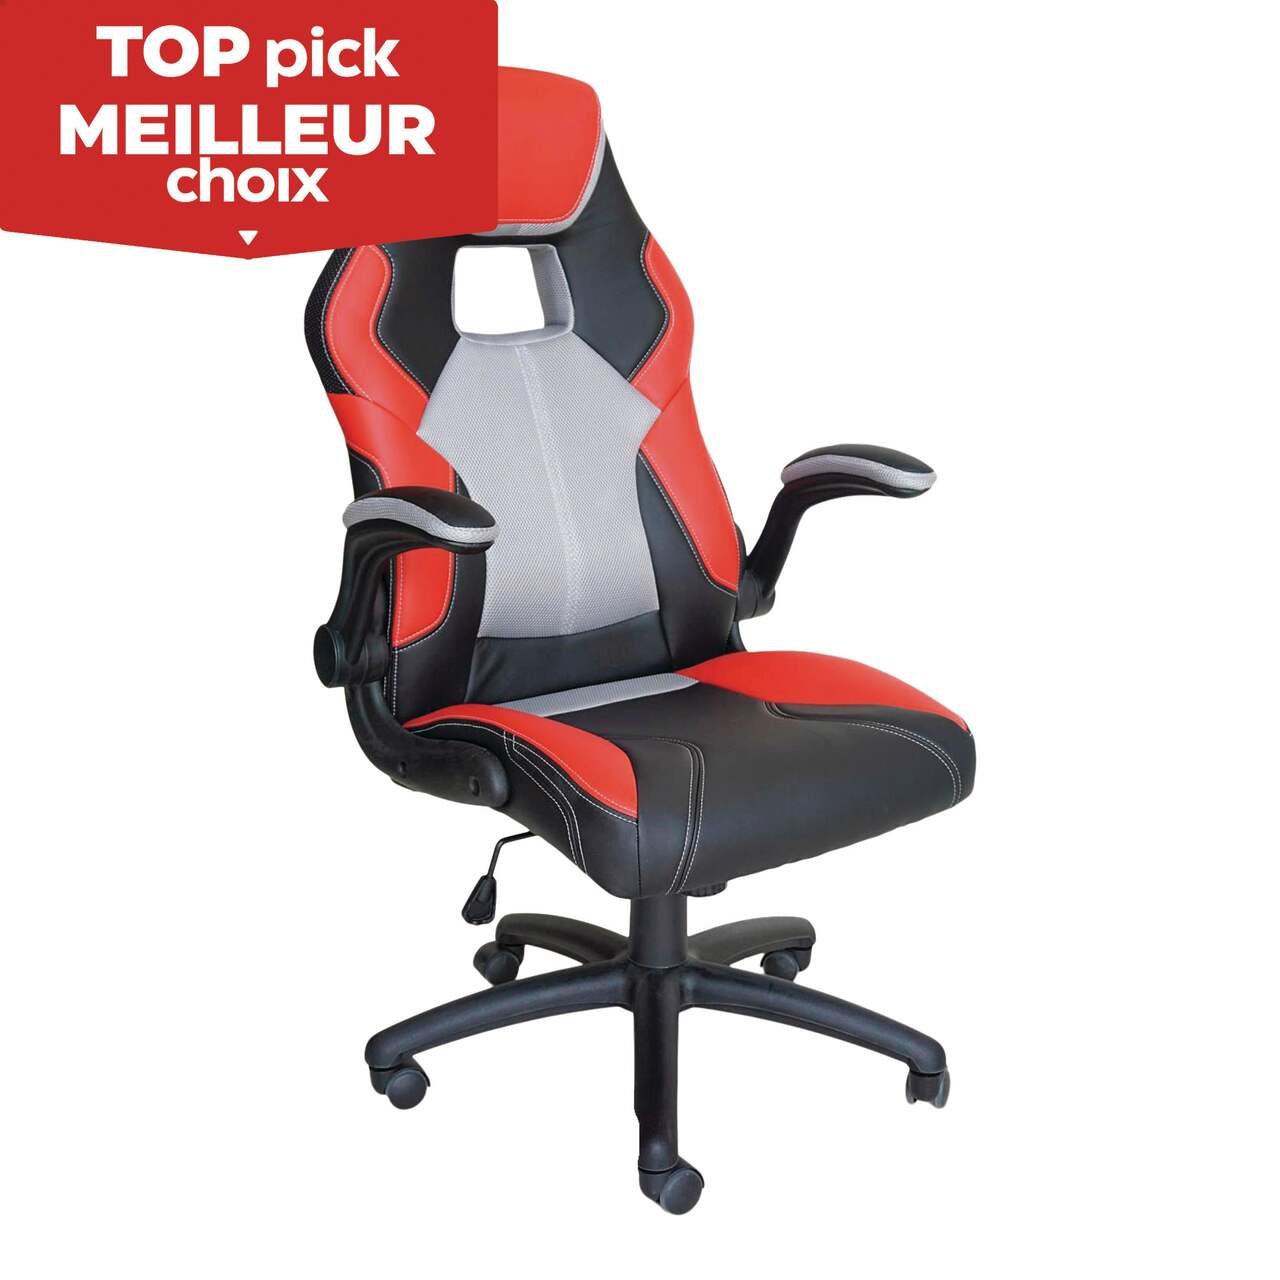 https://media-www.canadiantire.ca/product/living/home-decor/furniture/1680115/x-rocker-valor-2-0-office-pc-gaming-chair-68f725b4-2653-4c90-b871-9665dedab47c-jpgrendition.jpg?imdensity=1&imwidth=640&impolicy=mZoom